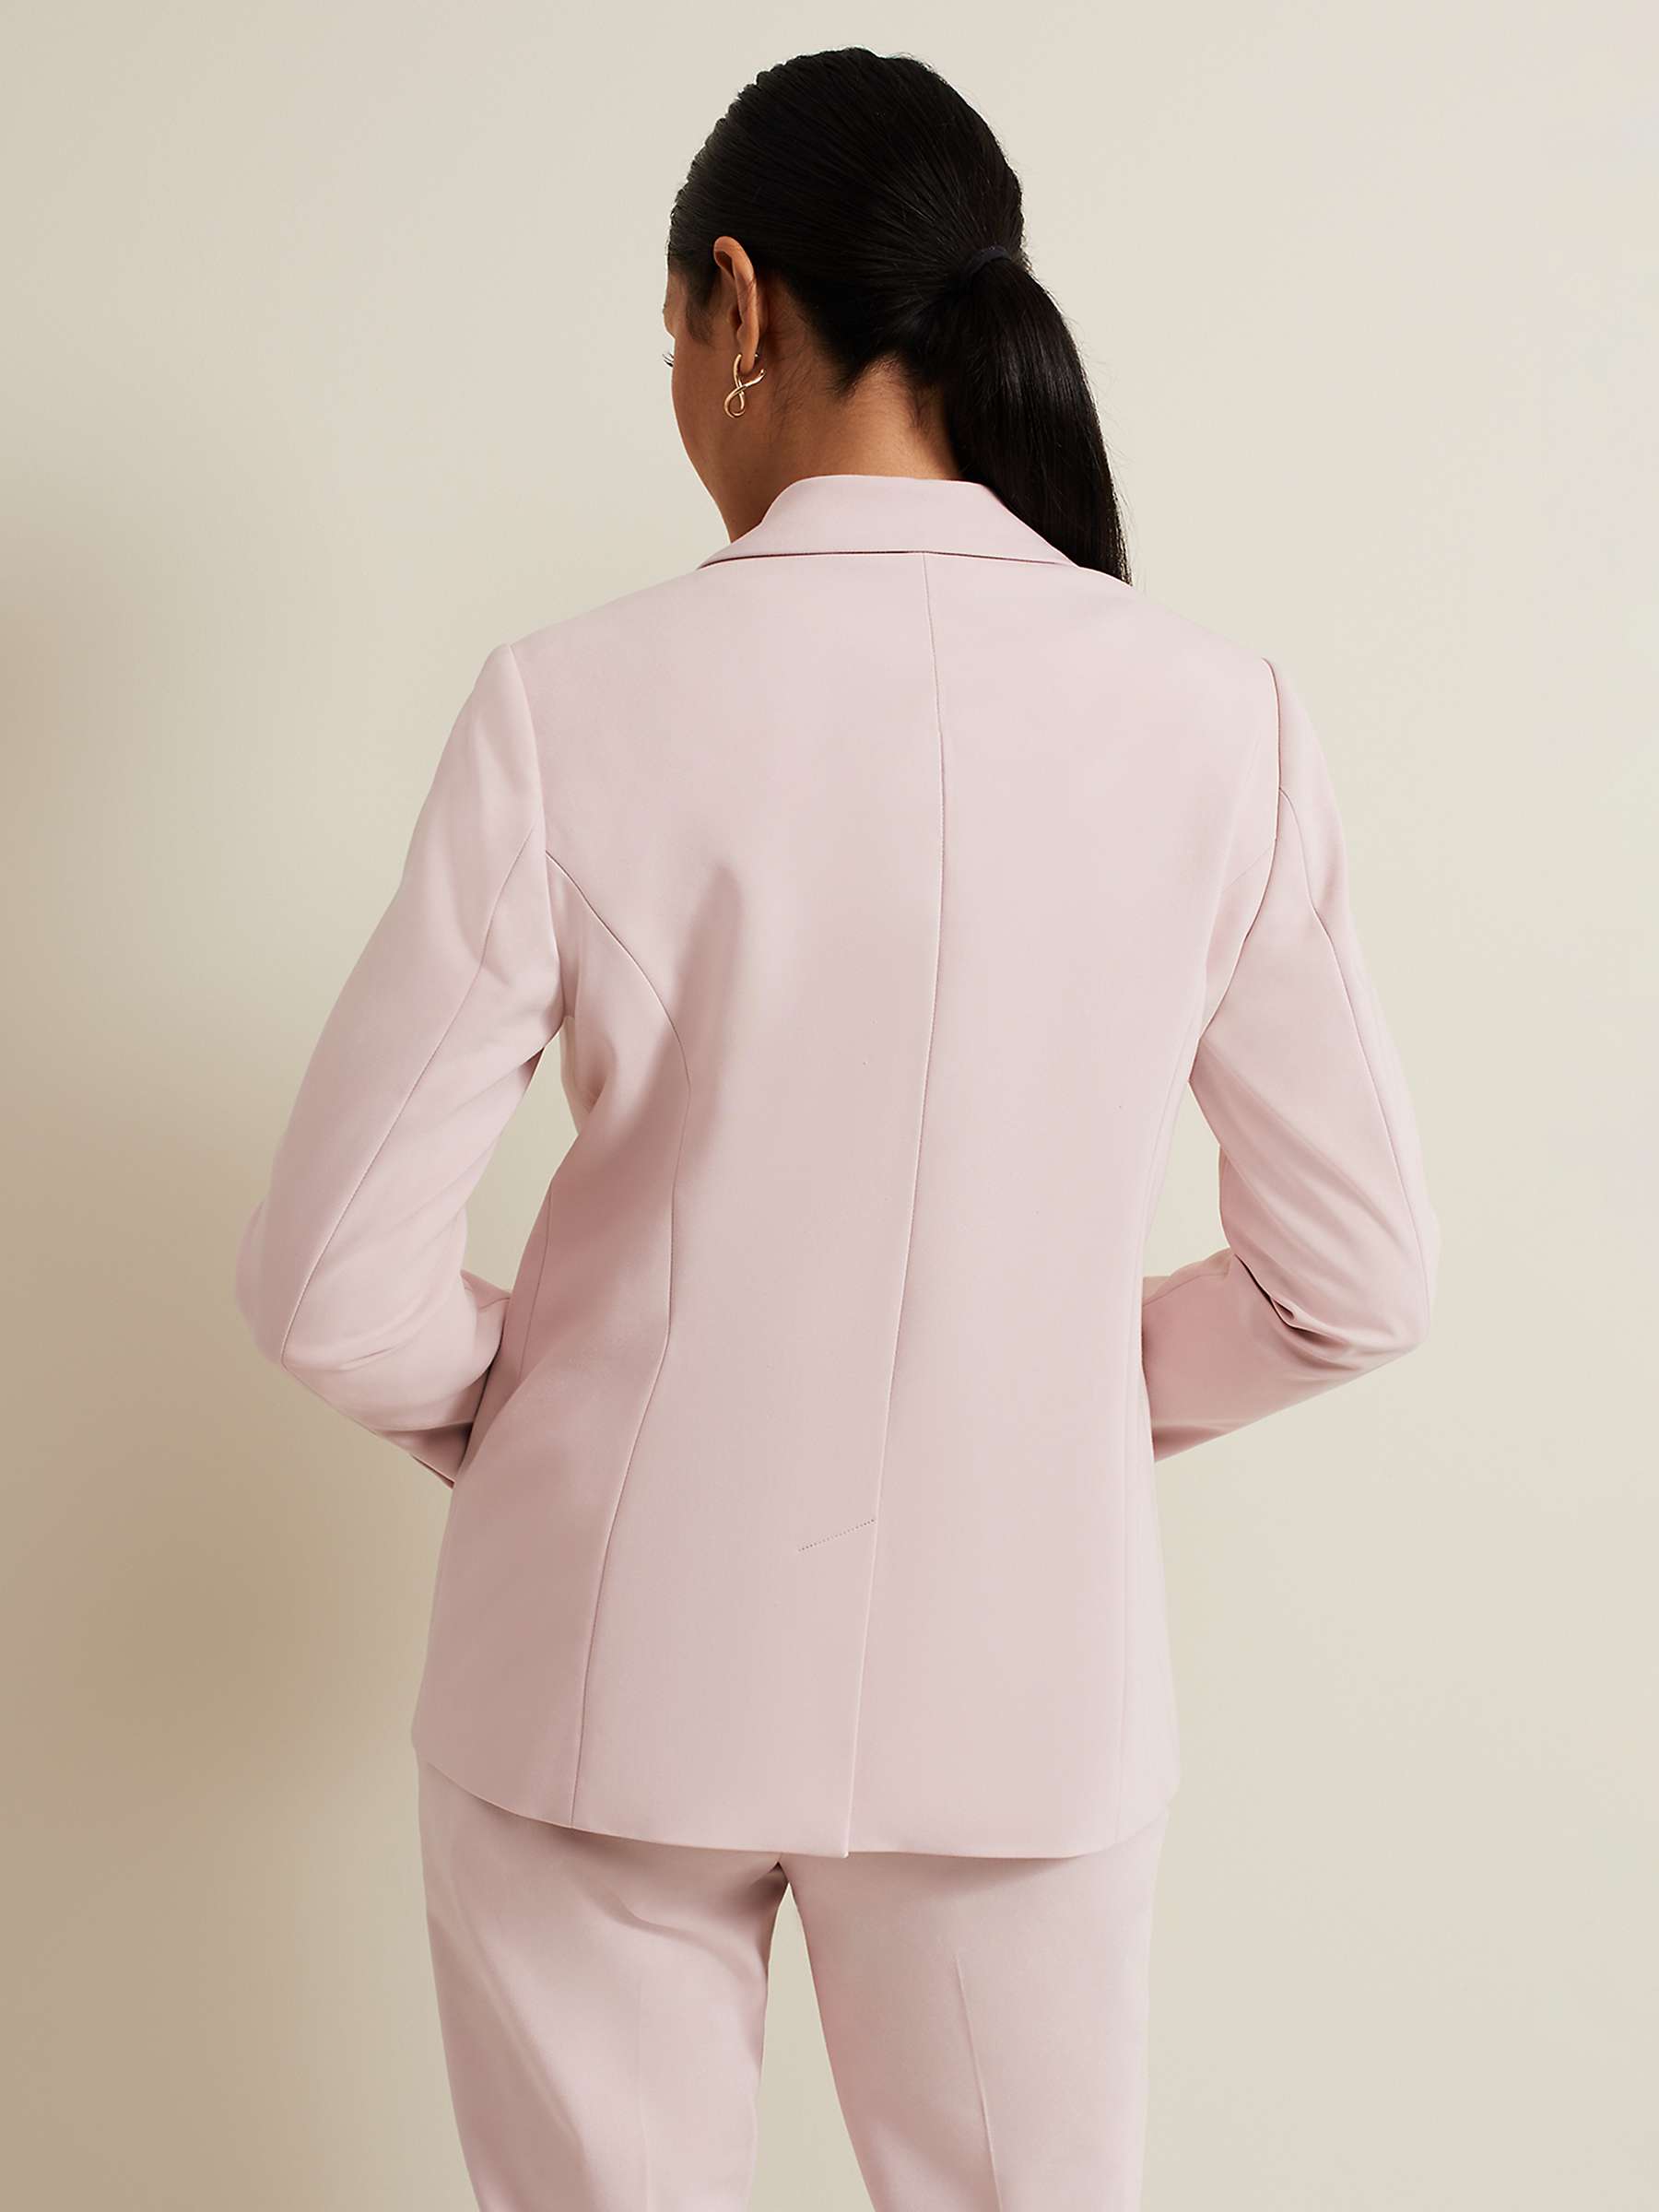 Buy Phase Eight Petite Ulrica Suit Jacket, Antique Rose Online at johnlewis.com